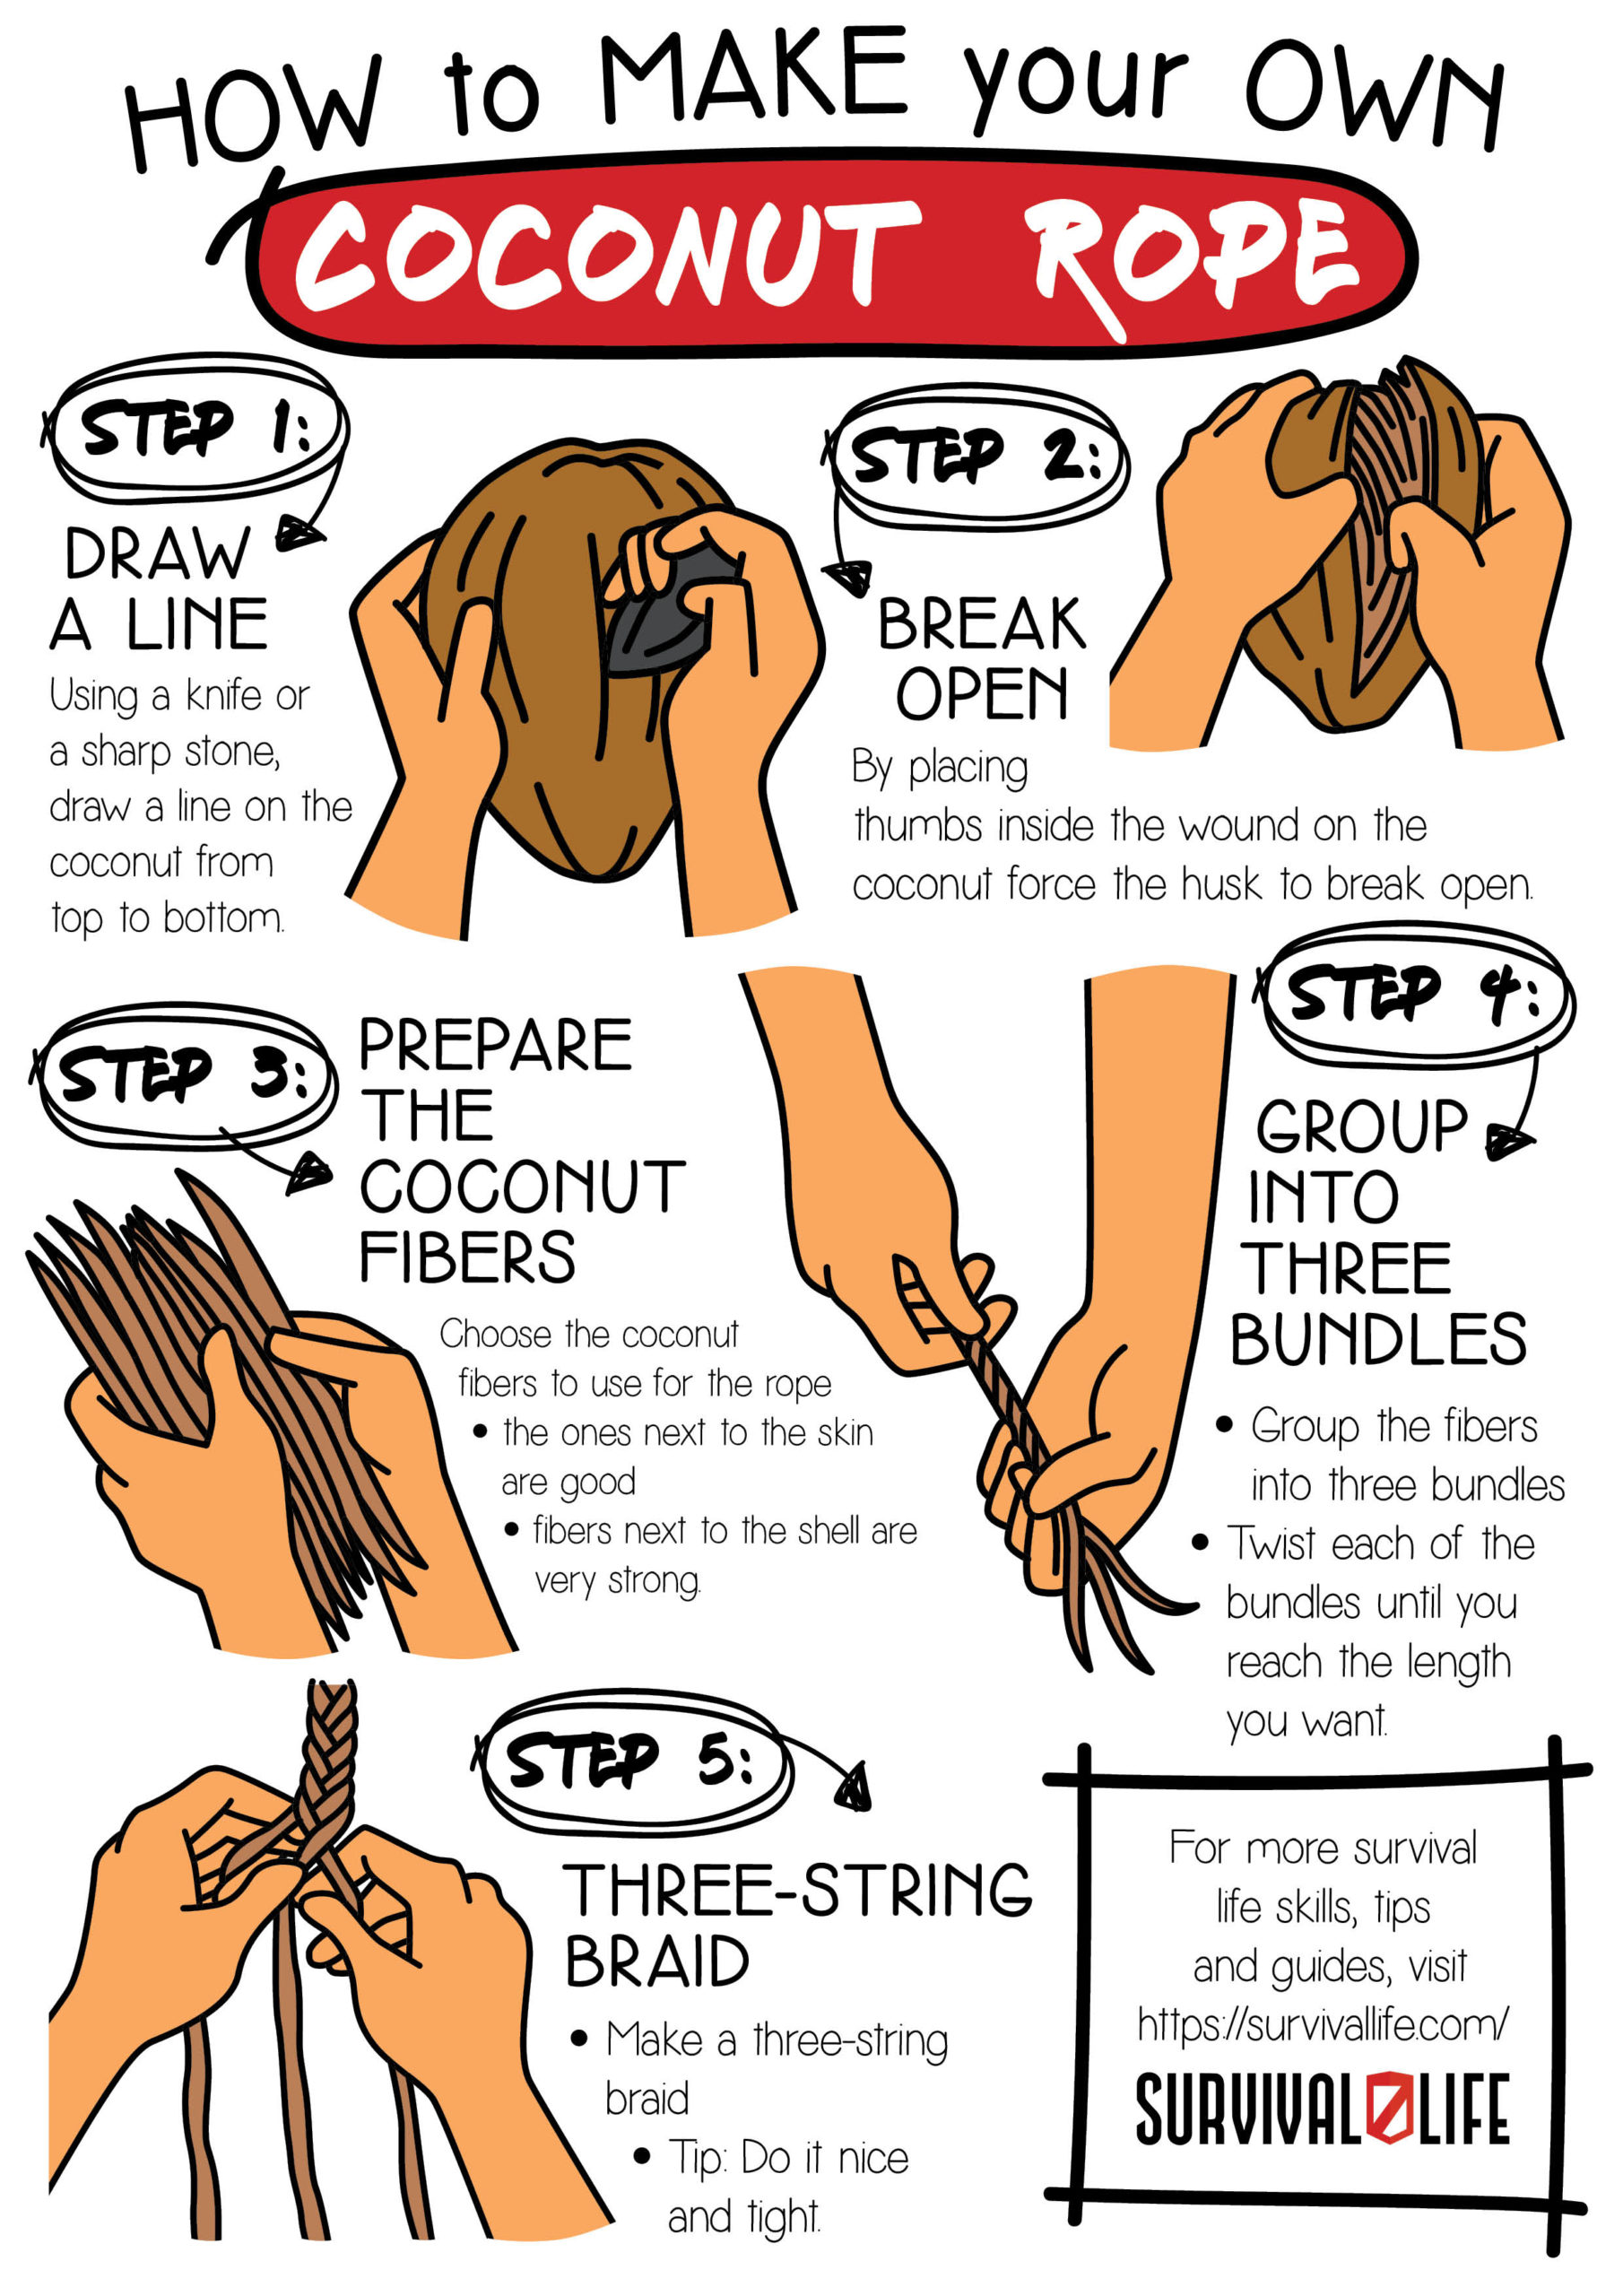 How to Make Your Own Coconut Rope